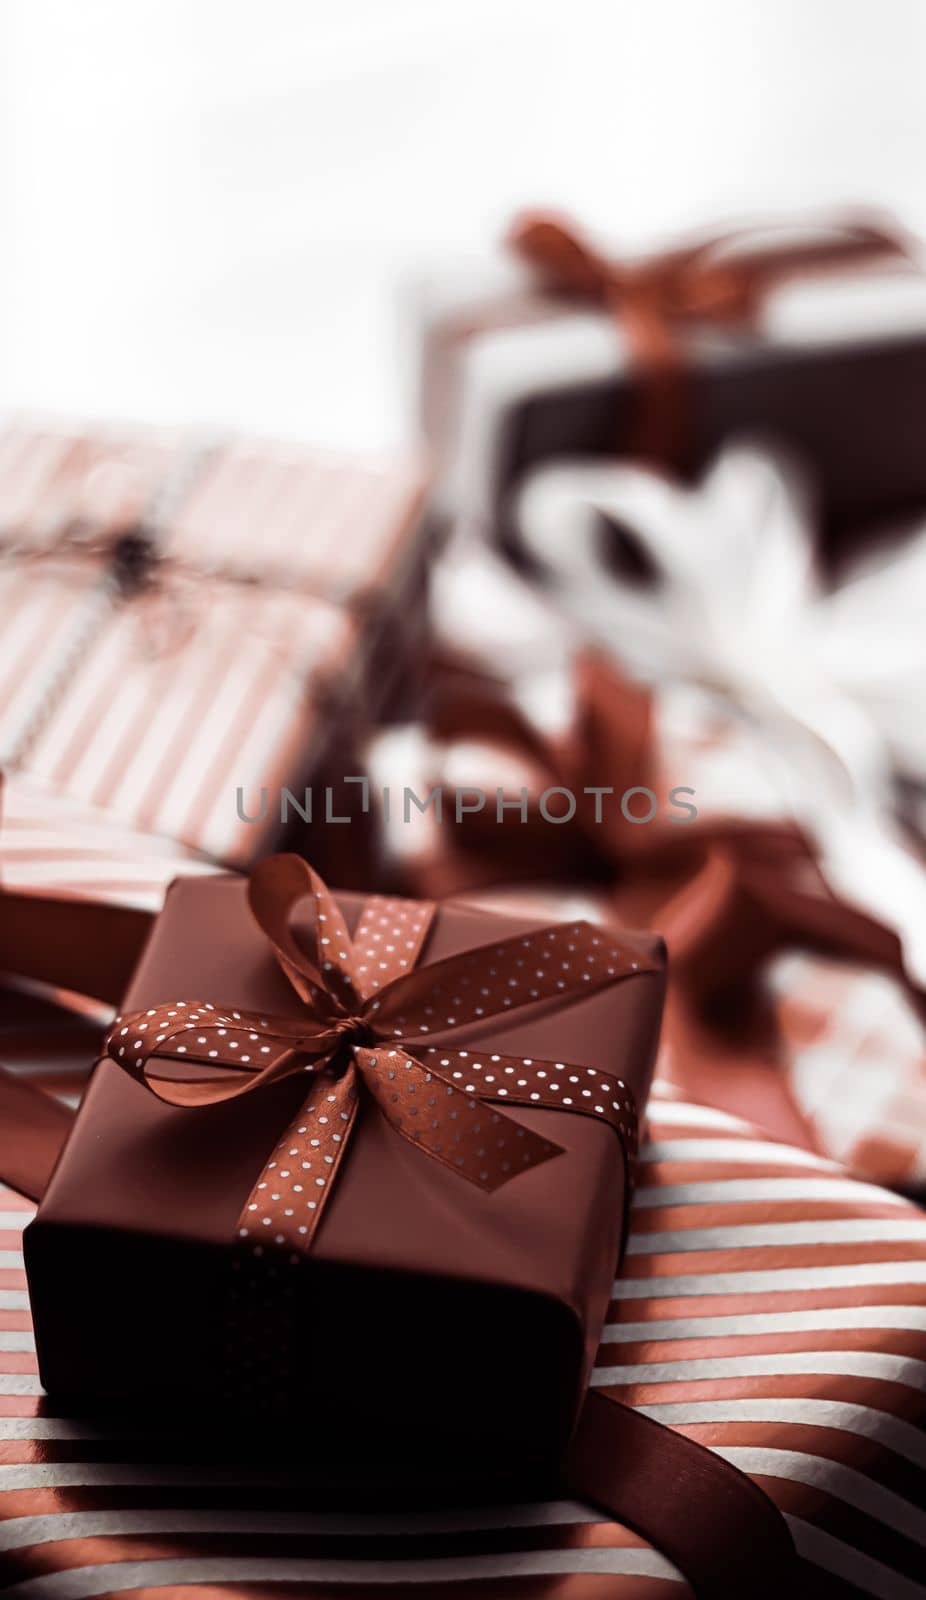 Holiday gifts and wrapped luxury presents, chocolate gift boxes as surprise present for birthday, Christmas, New Year, Valentines Day, boxing day, wedding and holidays shopping or beauty box delivery by Anneleven